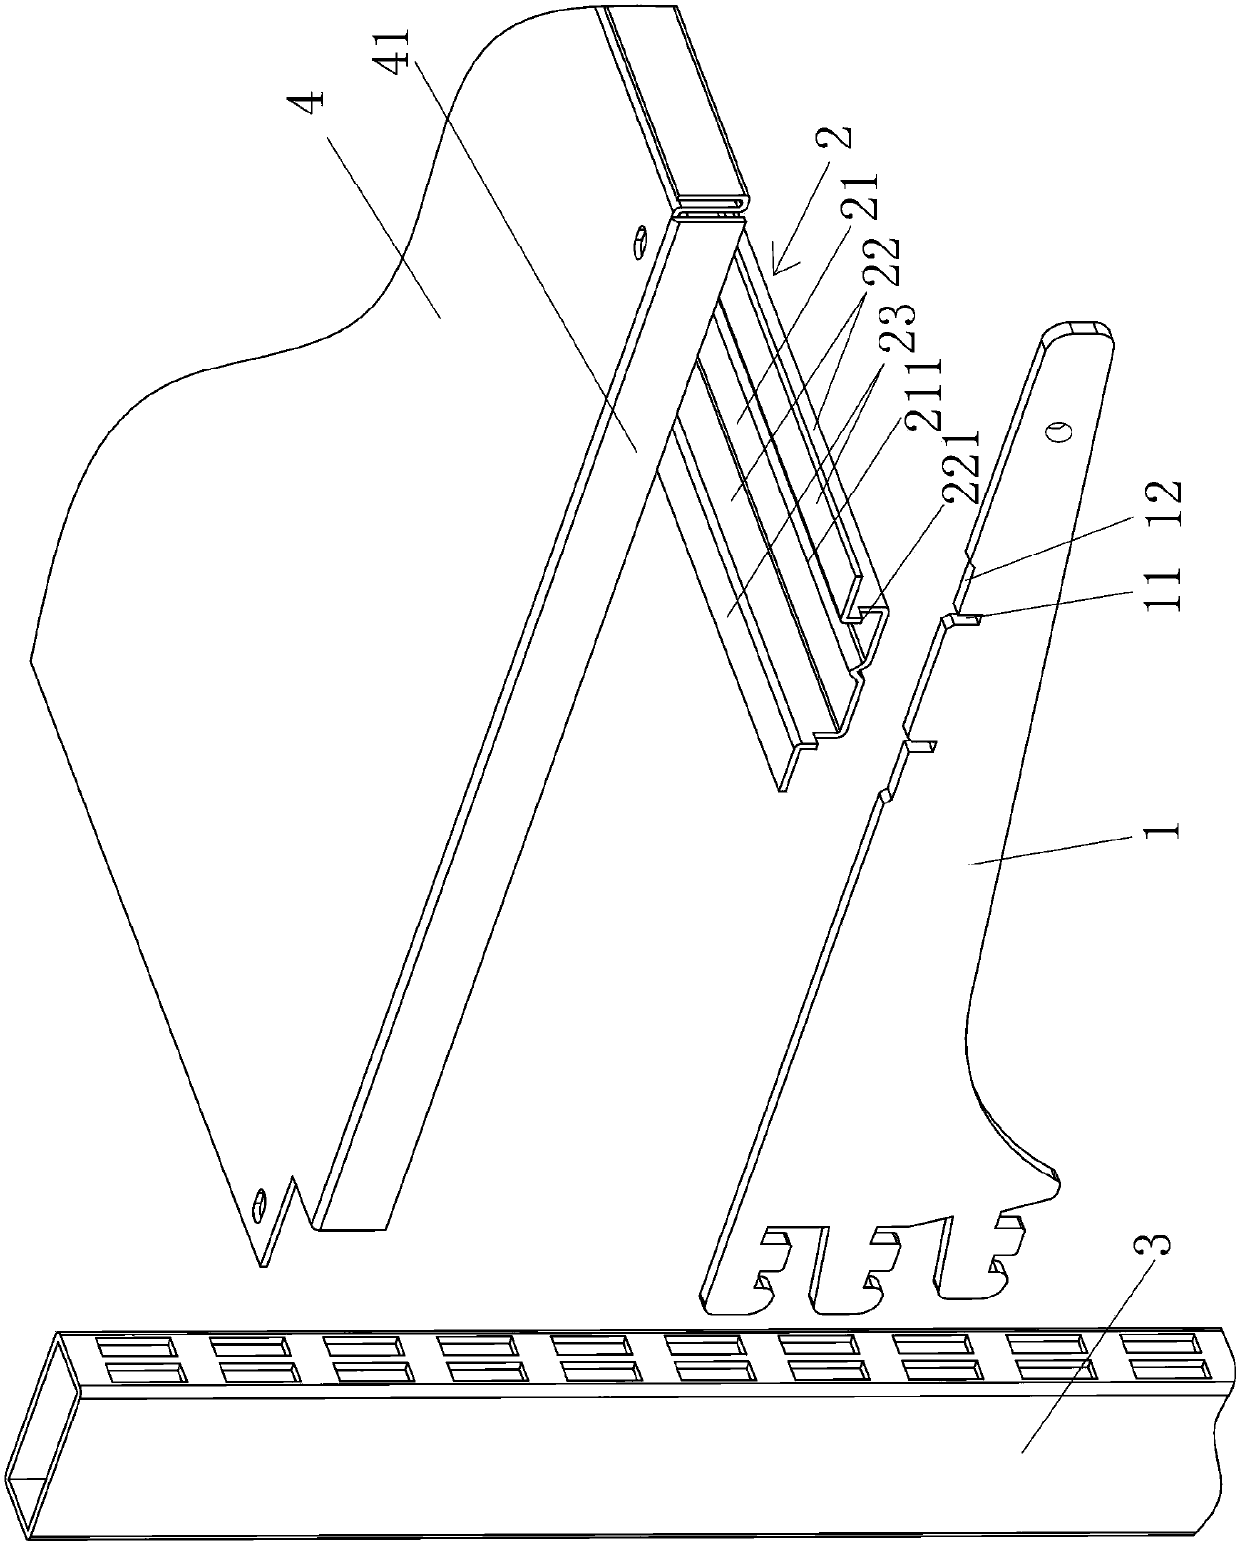 Supporting structure of shelf board for goods shelf